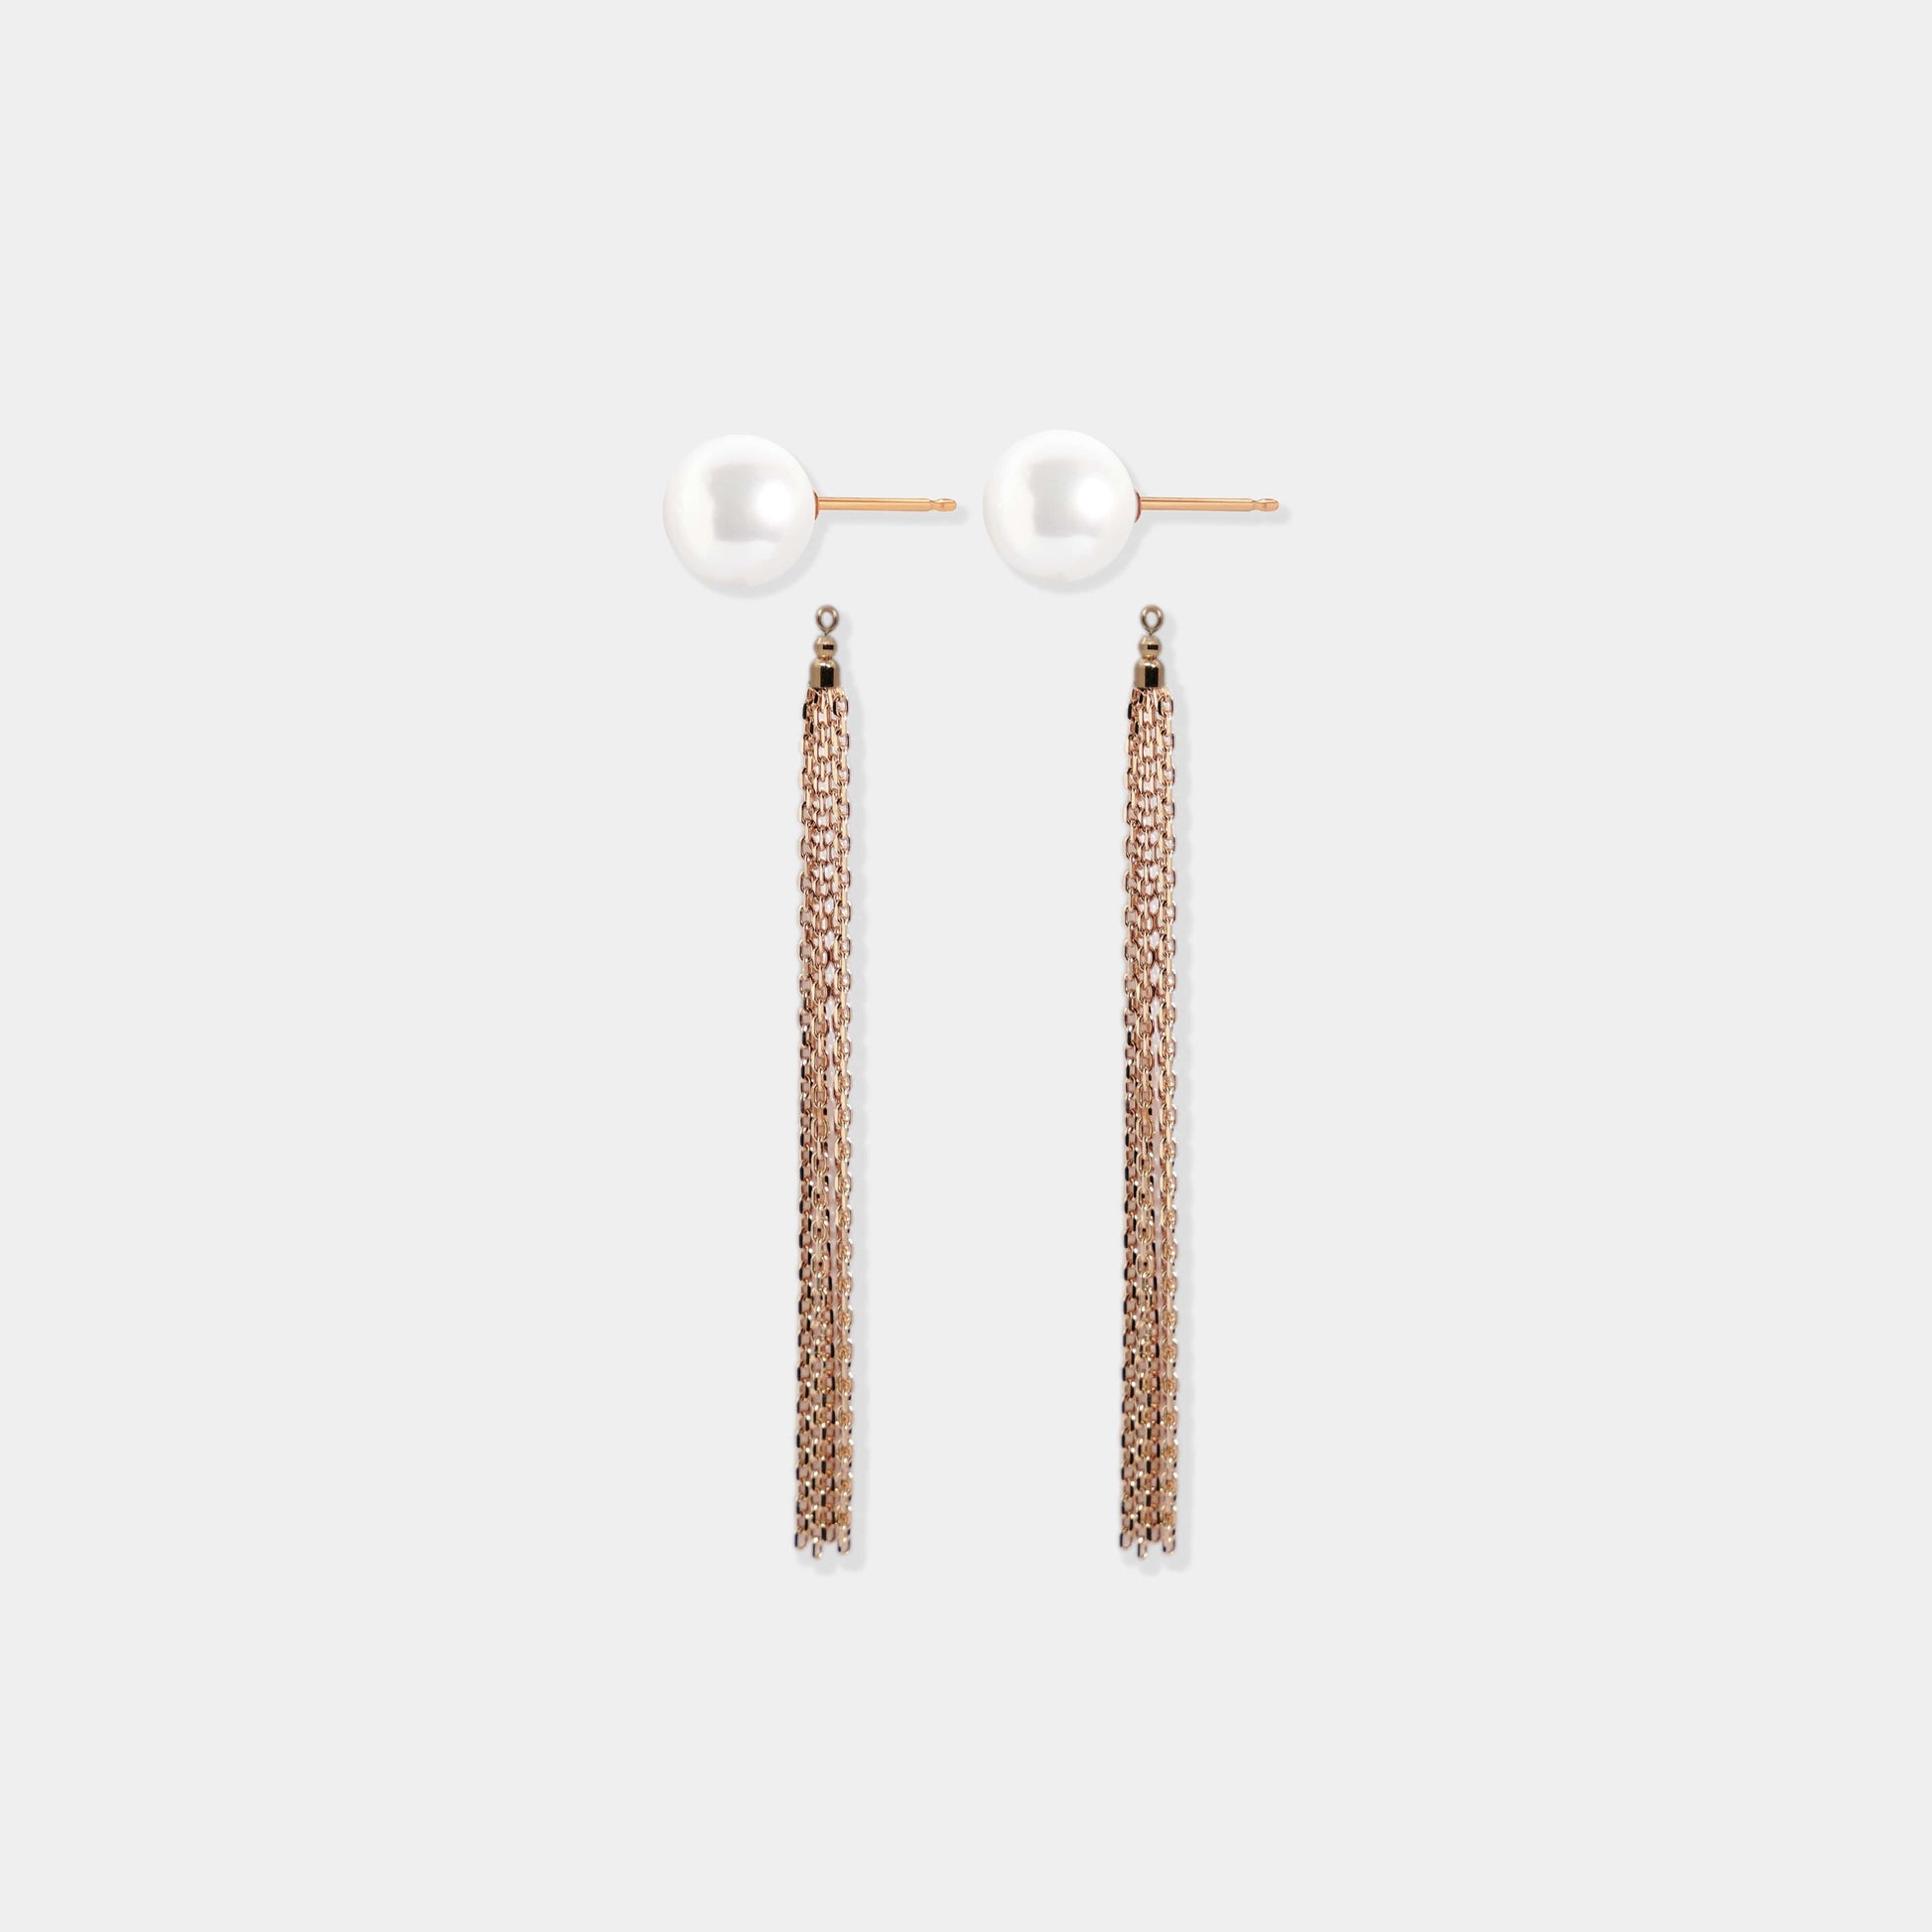 Stylish pearl and gold earrings on white surface, Pearl + Fringe Piercing